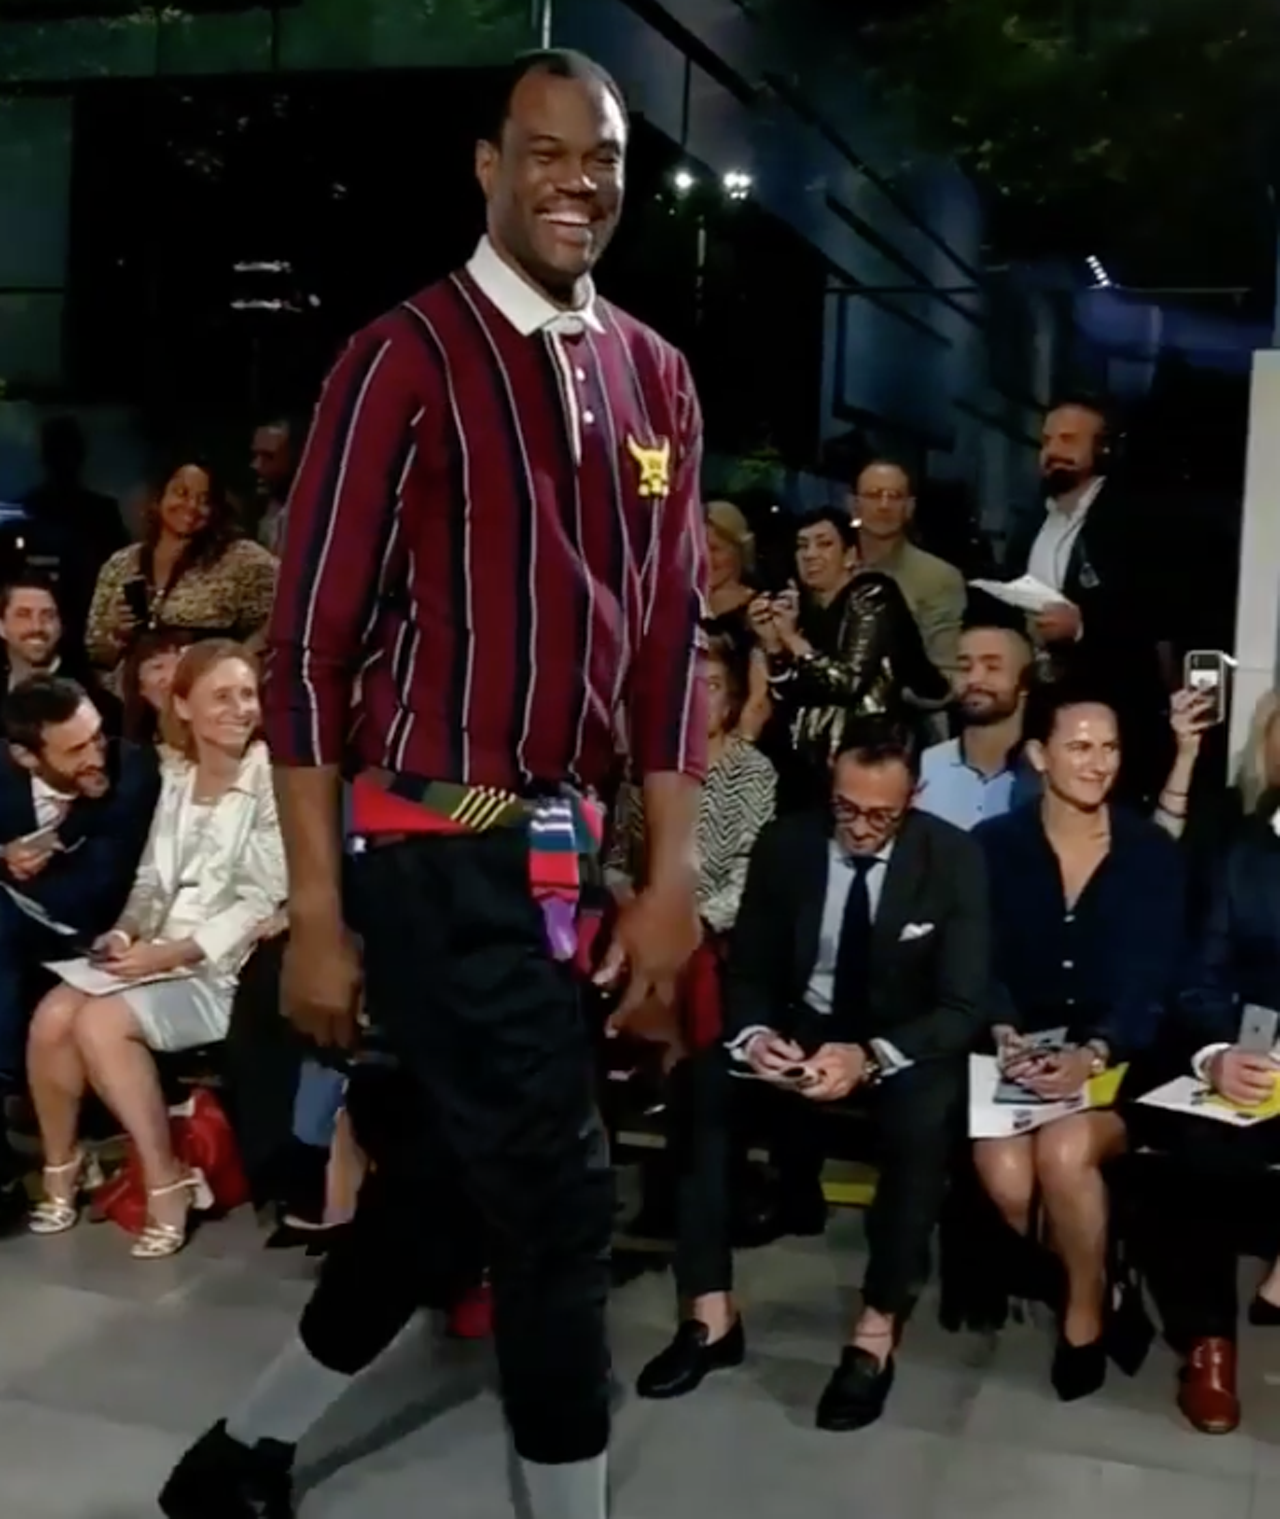 David Robinson modeling in New York Fashion Week
Spurs legend David Robinson doing anything is automatically amazing, but Robinson modelling is a whole other deal. Whether you choose to recreate his professional suit look or go for the ‘90s theme he dressed up as (much more fun), you can pretend you’re 7’1 too and strut like Robinson.
Photo via Instagram / nicekicks